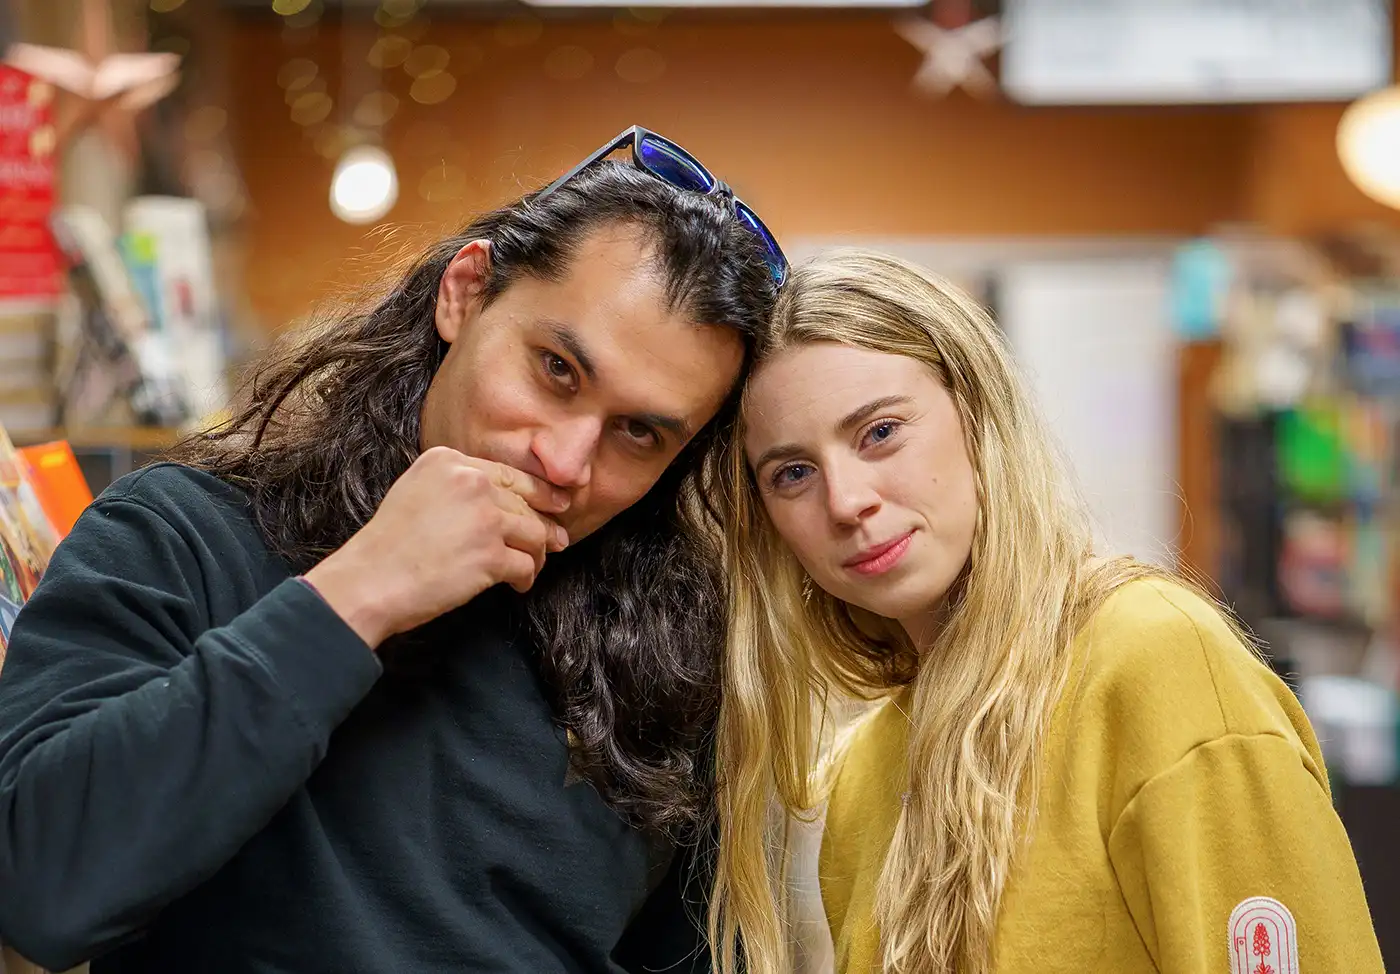 (L–R) Danny Patiño and Bri McCall make up the indie duo The Alpines. In this photo they are standing in a library. Danny leans into Bri, his hand covering his mouth coyly.